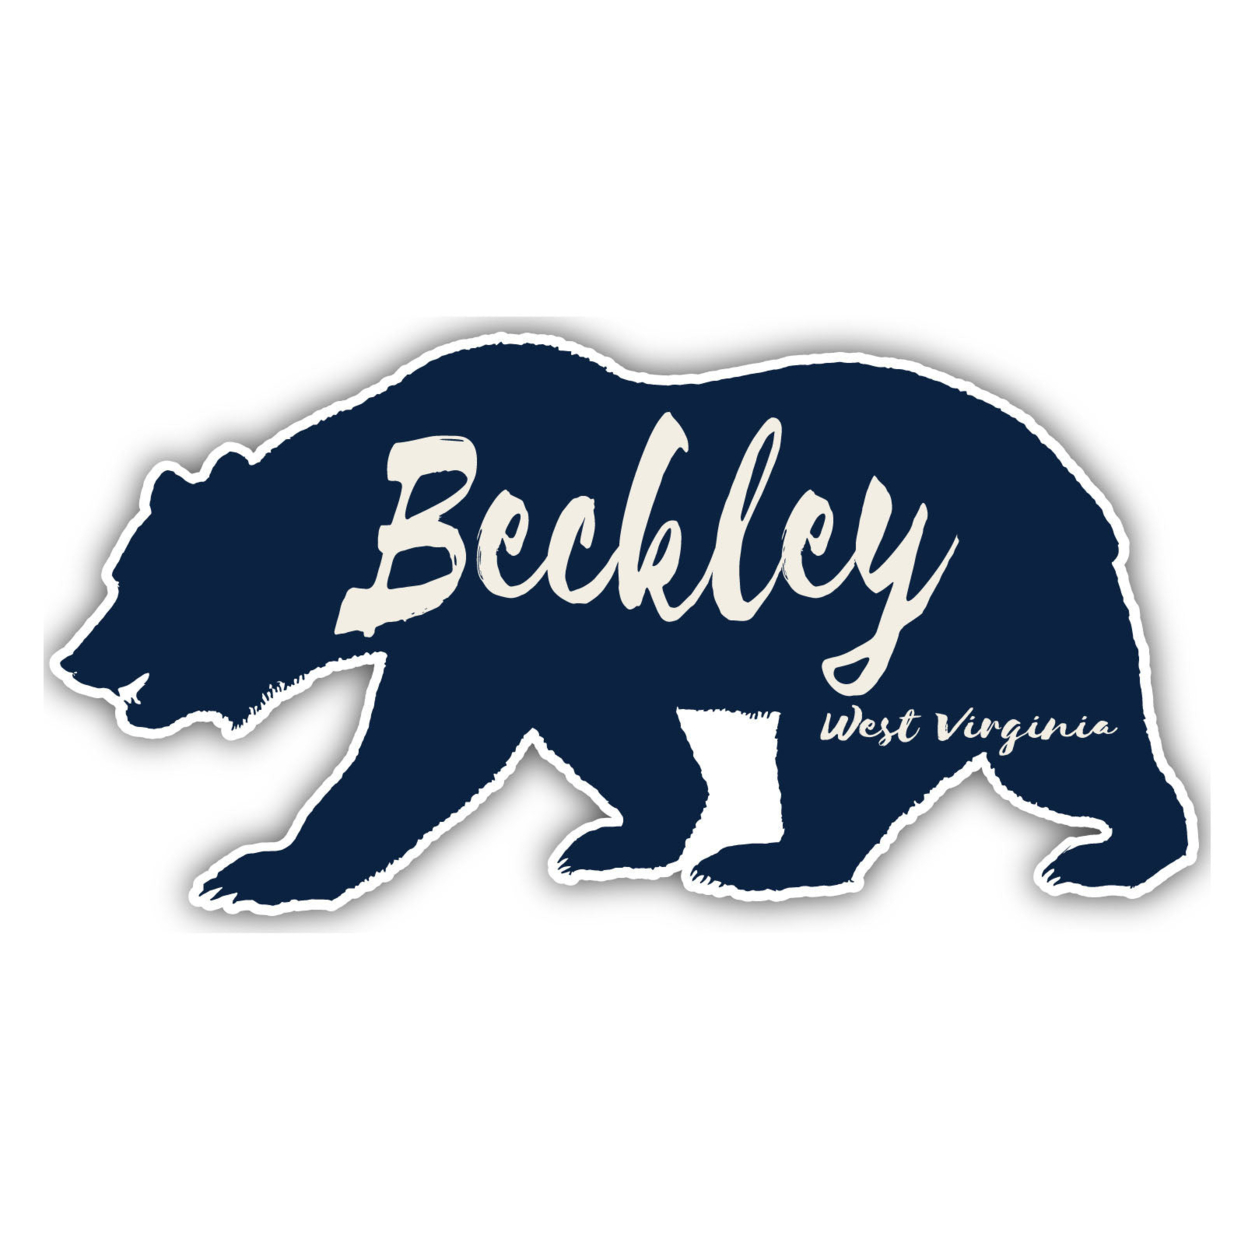 Beckley West Virginia Souvenir Decorative Stickers (Choose Theme And Size) - 4-Pack, 8-Inch, Bear